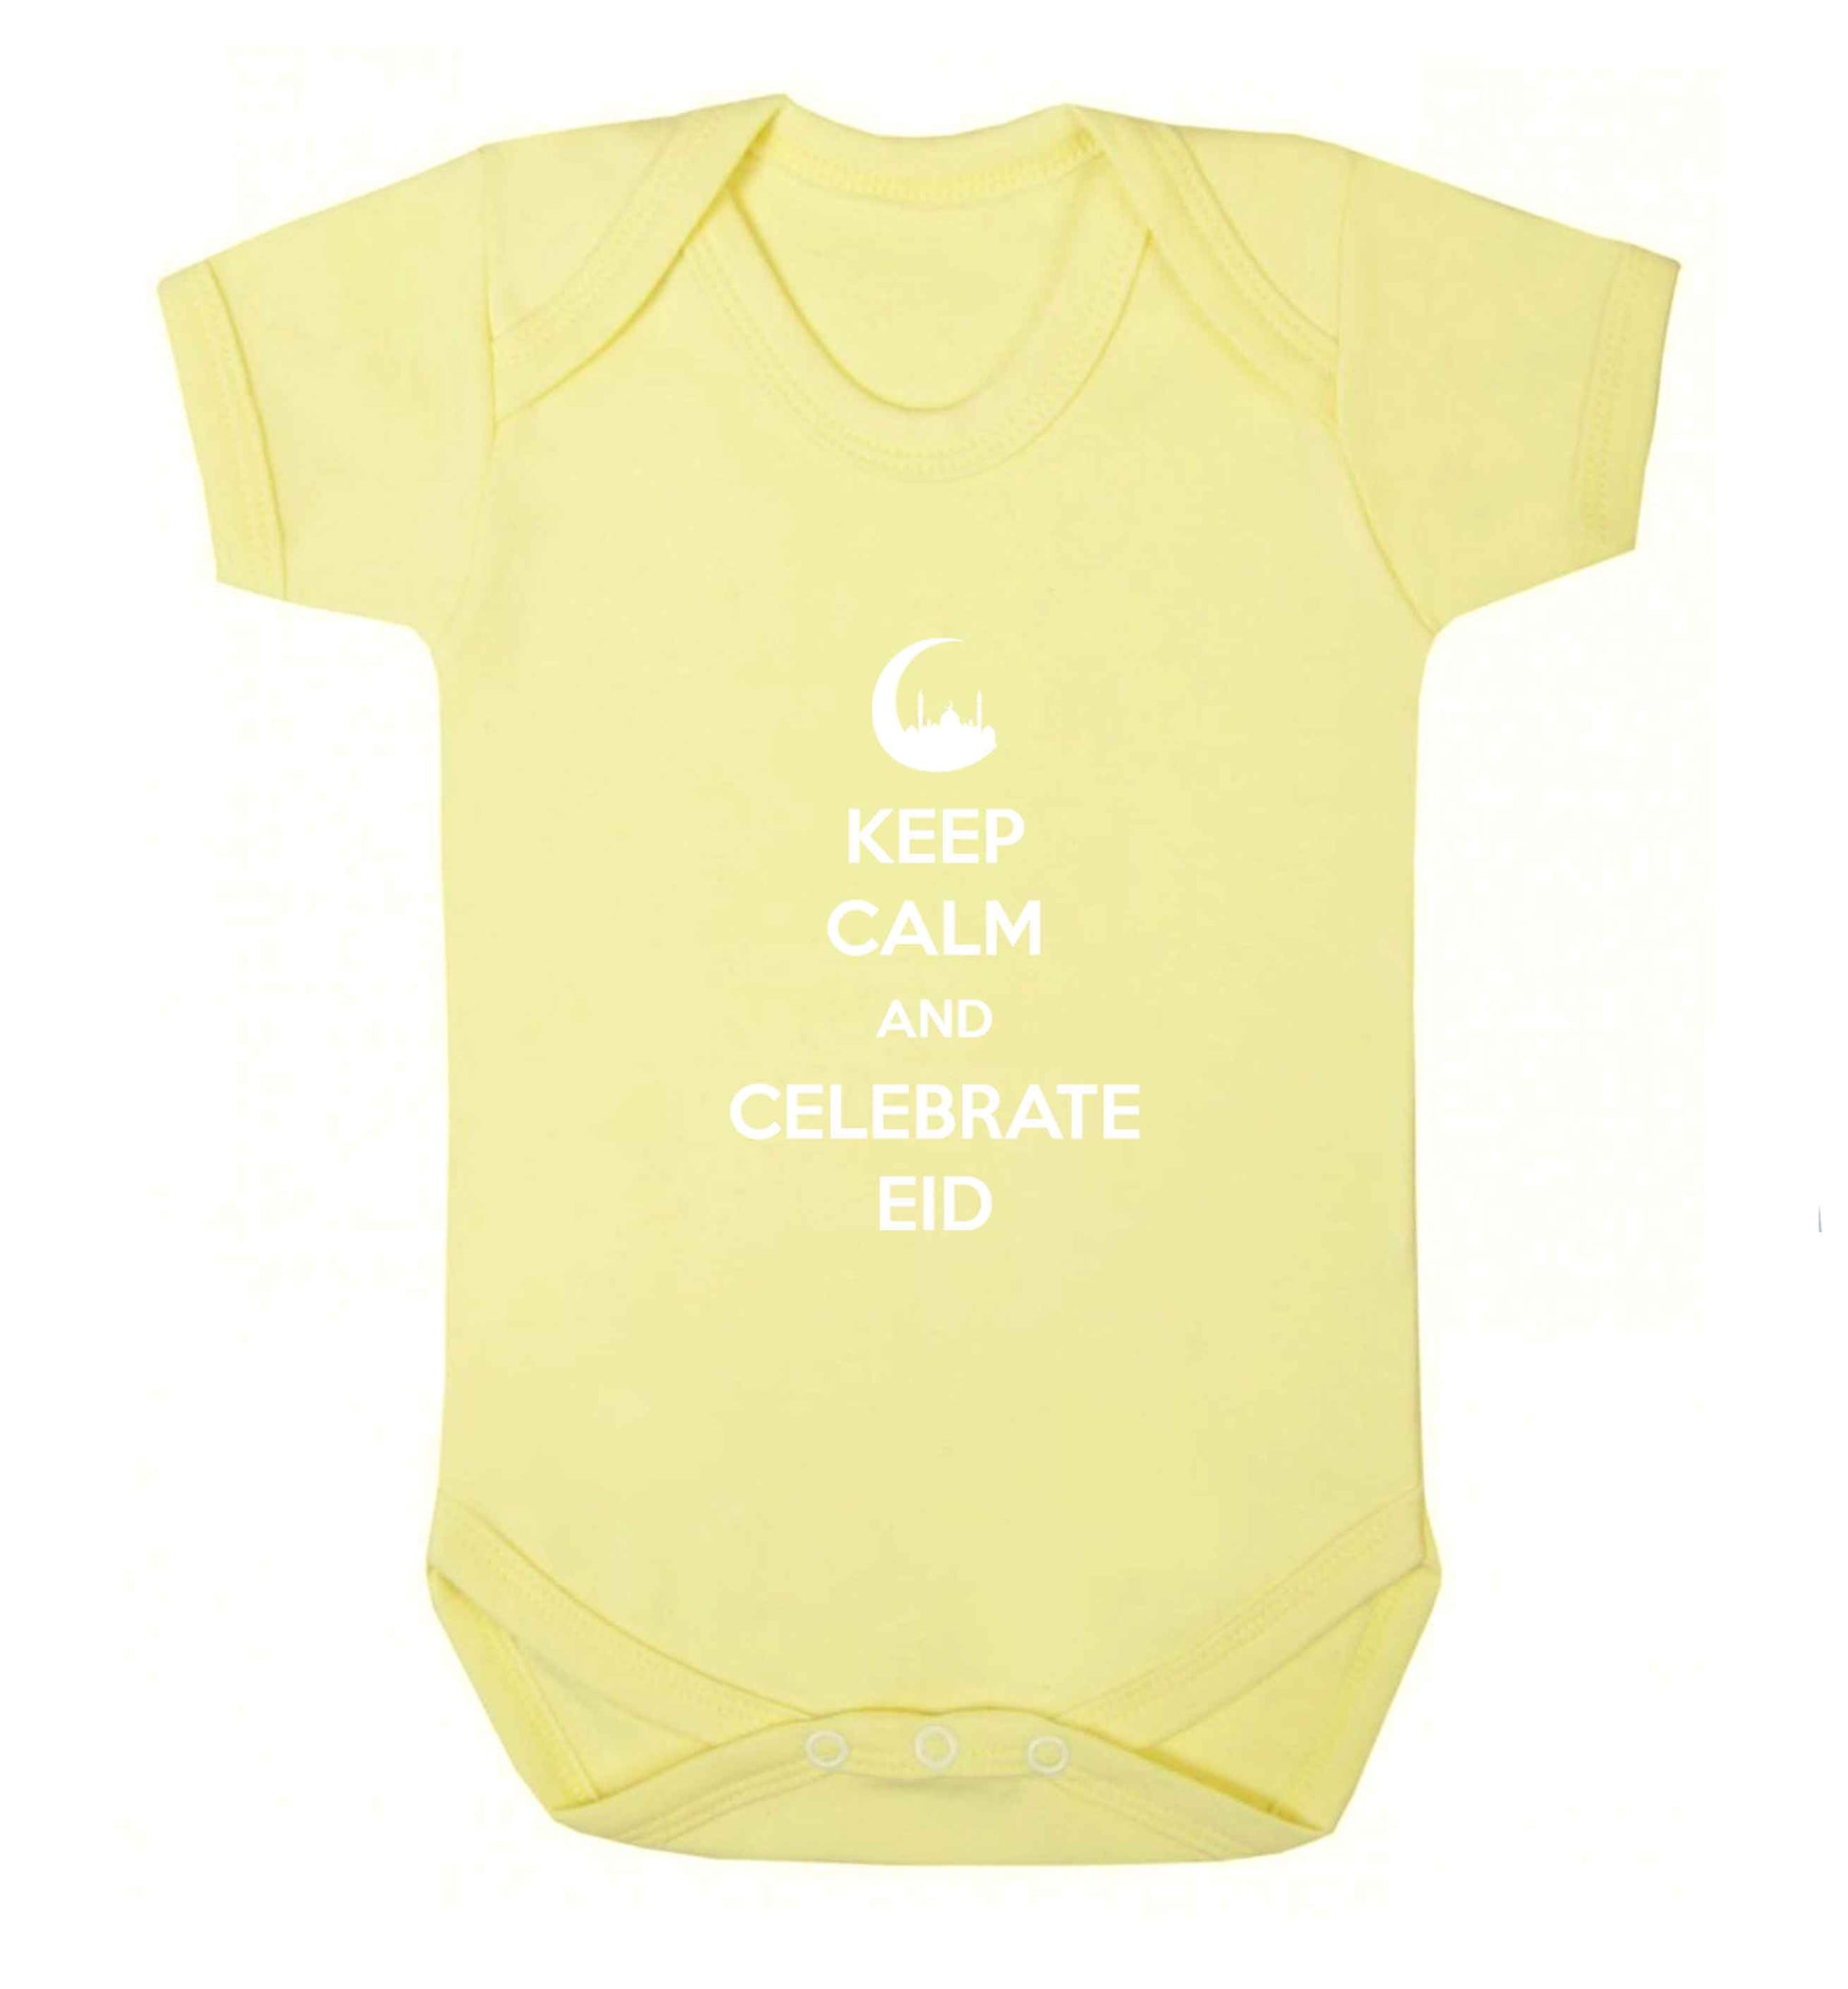 Keep calm and celebrate Eid baby vest pale yellow 18-24 months